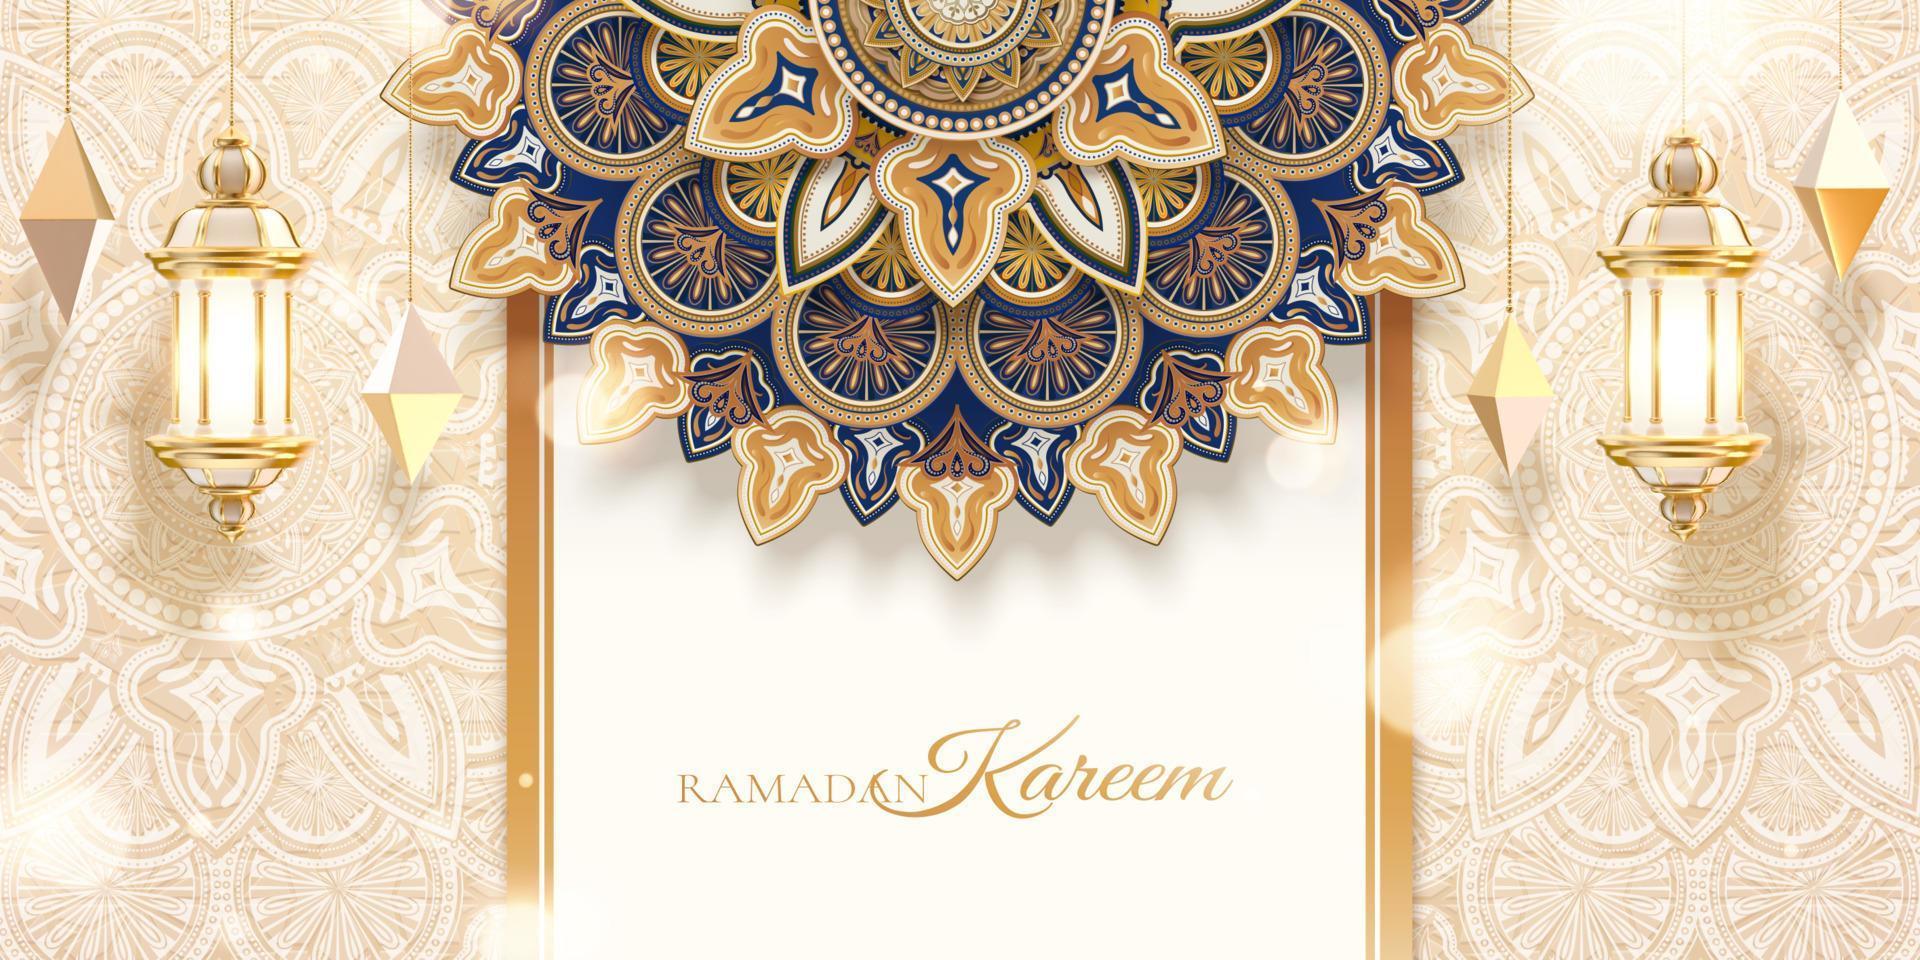 3d Islamic holiday celebration background design with luxury golden geometric patterns. Banner template suitable for Ramadan, Eid al-Fitr or Hari Raya. vector